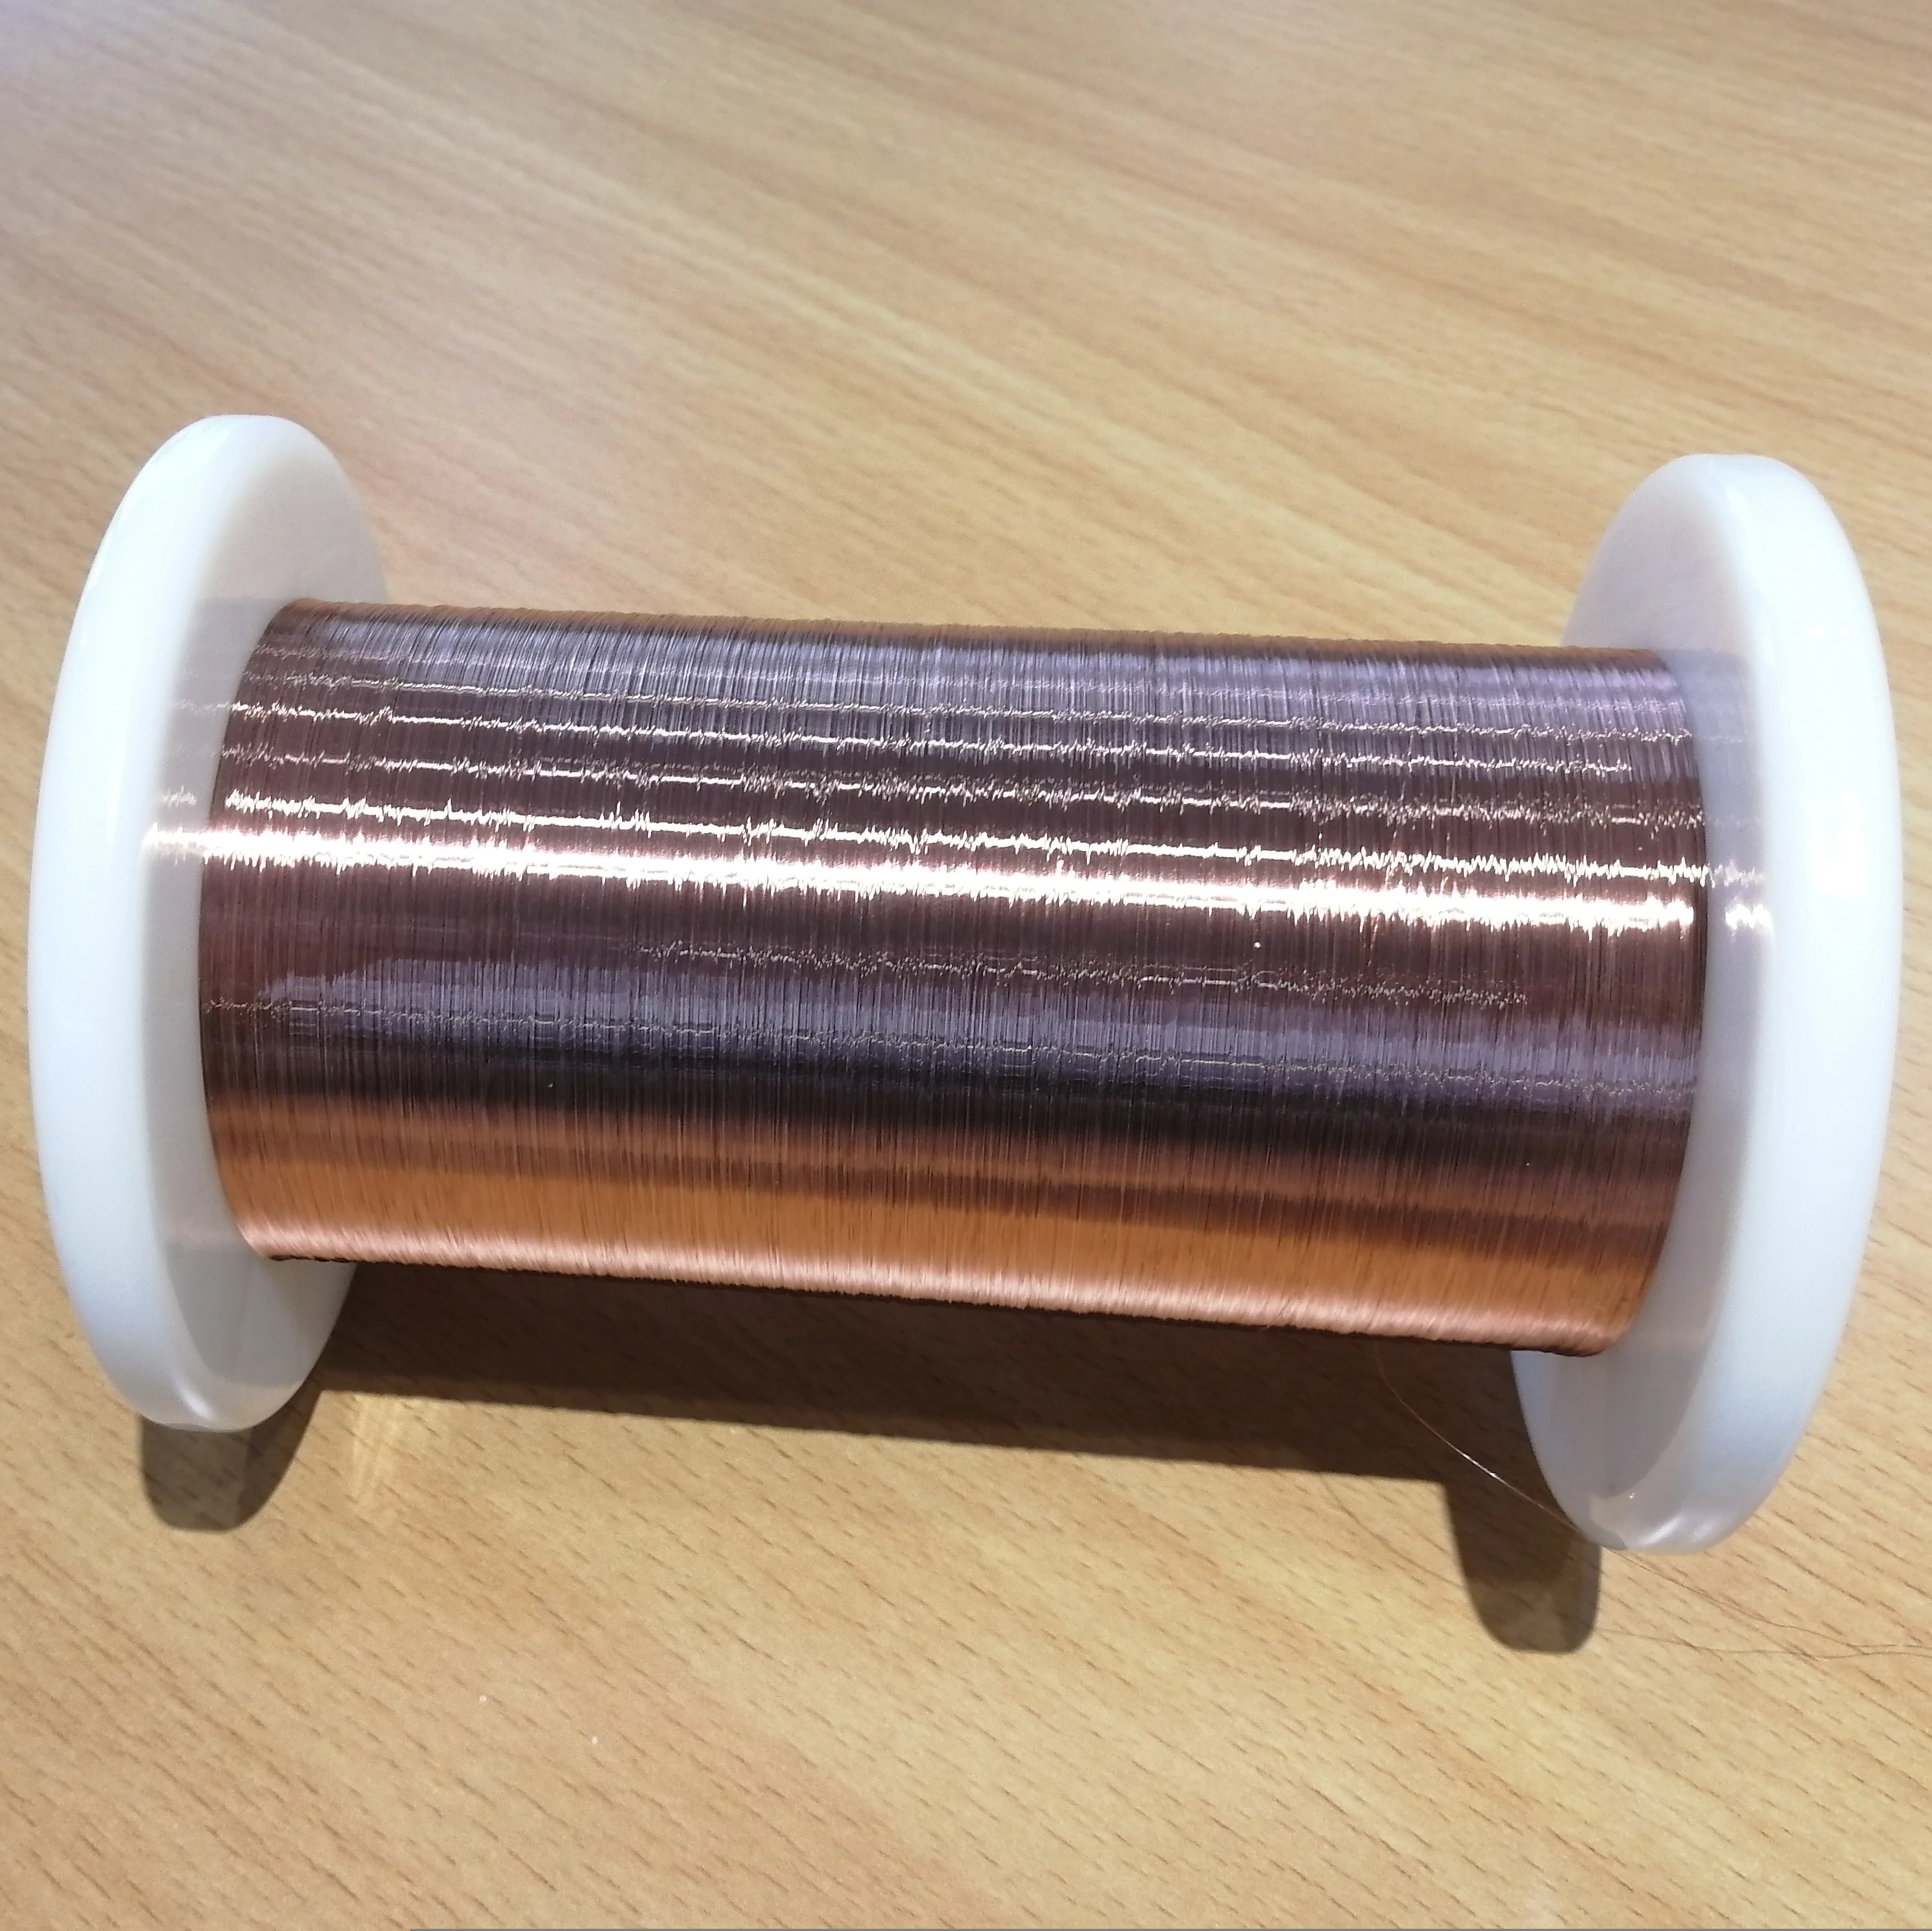 Ultra-fine enameled wires 0.31mm Polyesterimide enameled round copper wires with self bonding layer.